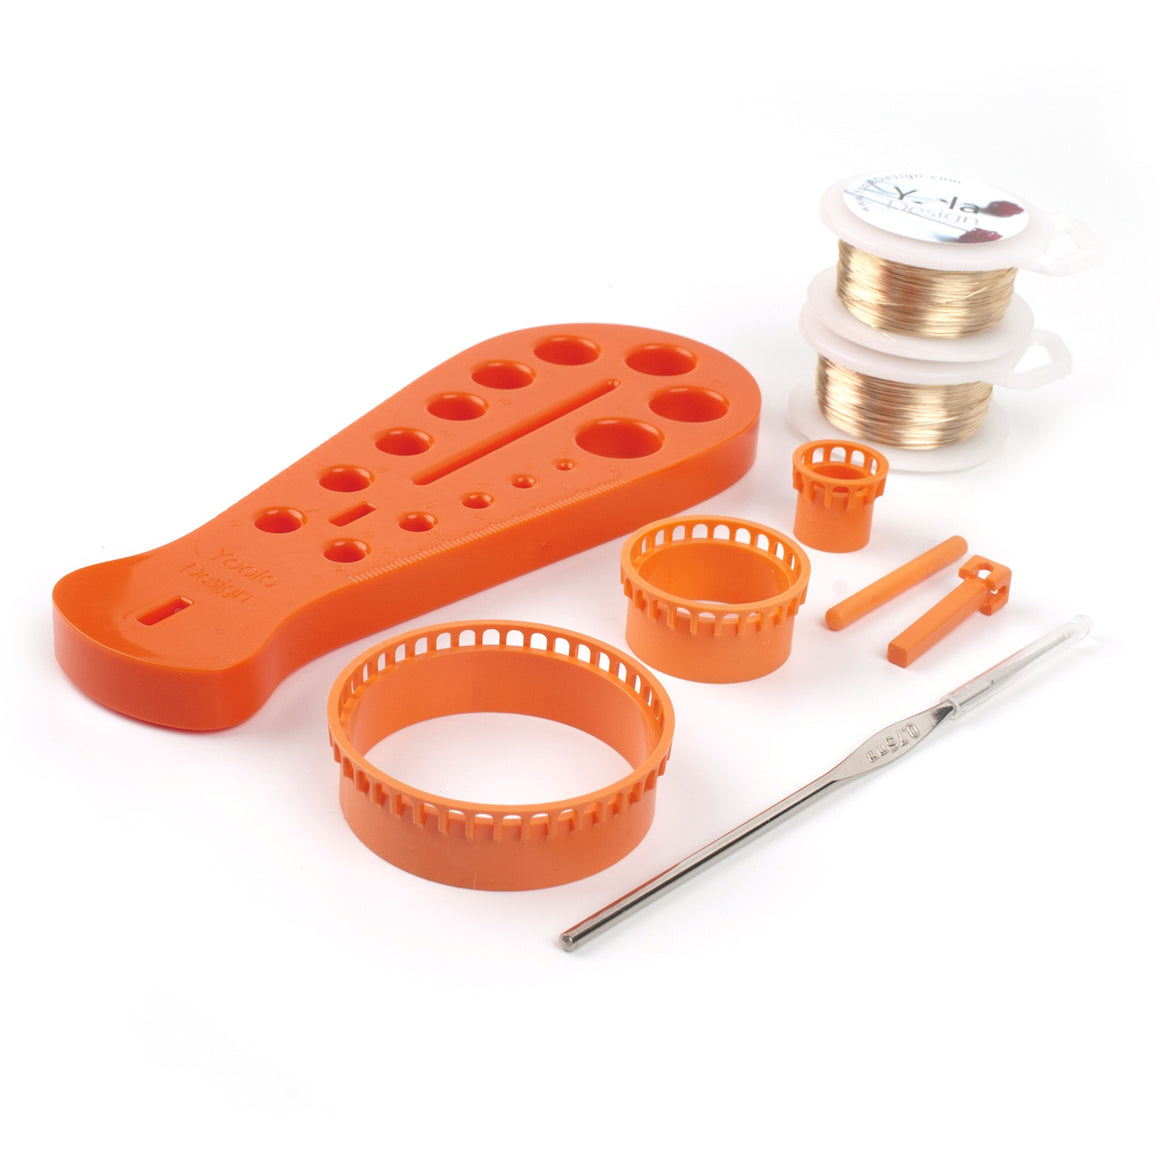 Extended Wire Crochet Supply Kit , 2 extra long wire spools, 4 pc ISK starter looms and more - Yooladesign